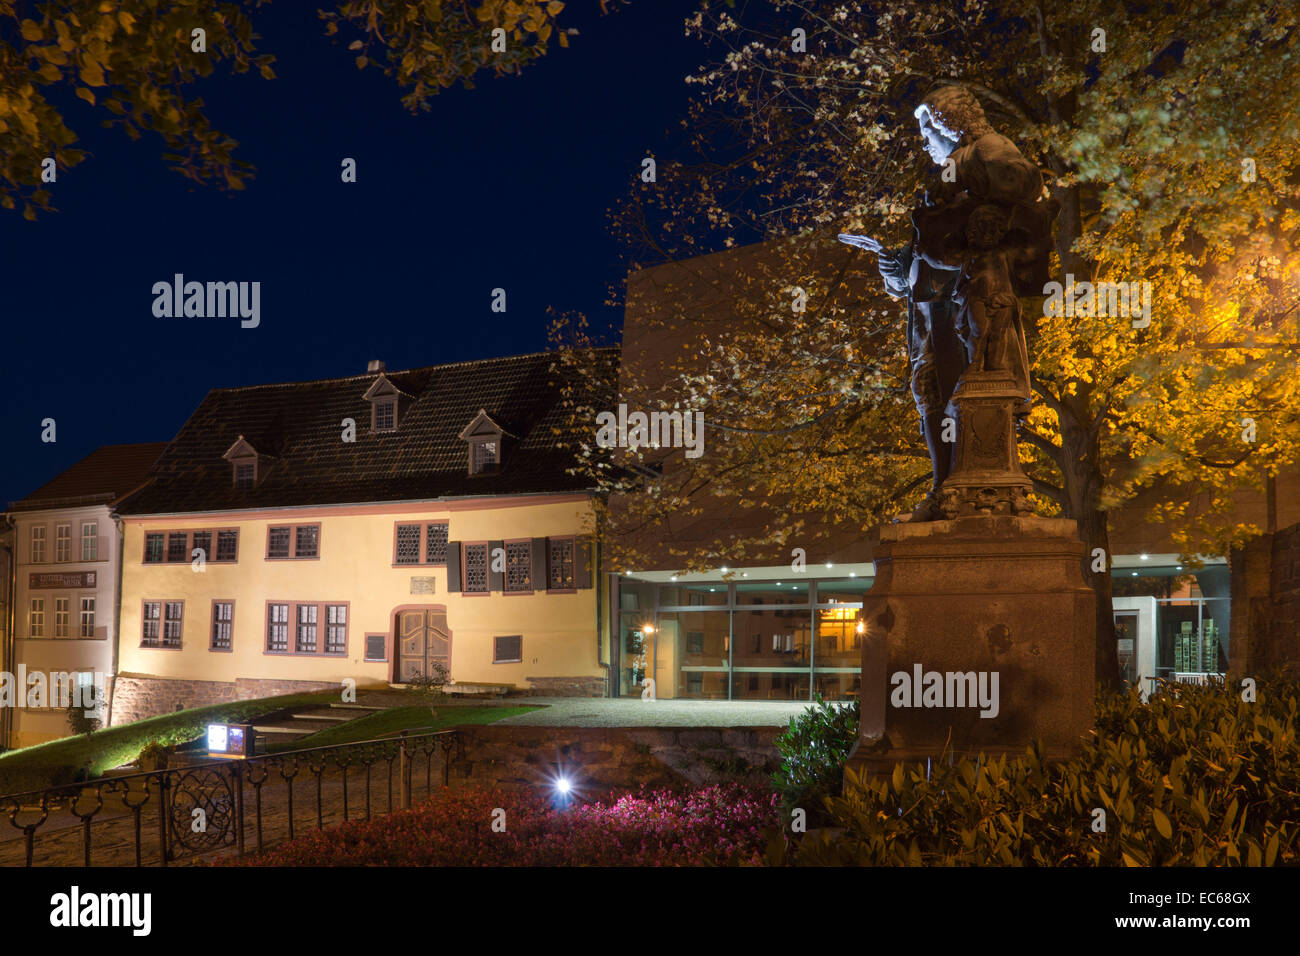 The Bach Monument and the Bach House at night, Eisenach, Thuringia, Germany, Europe Stock Photo